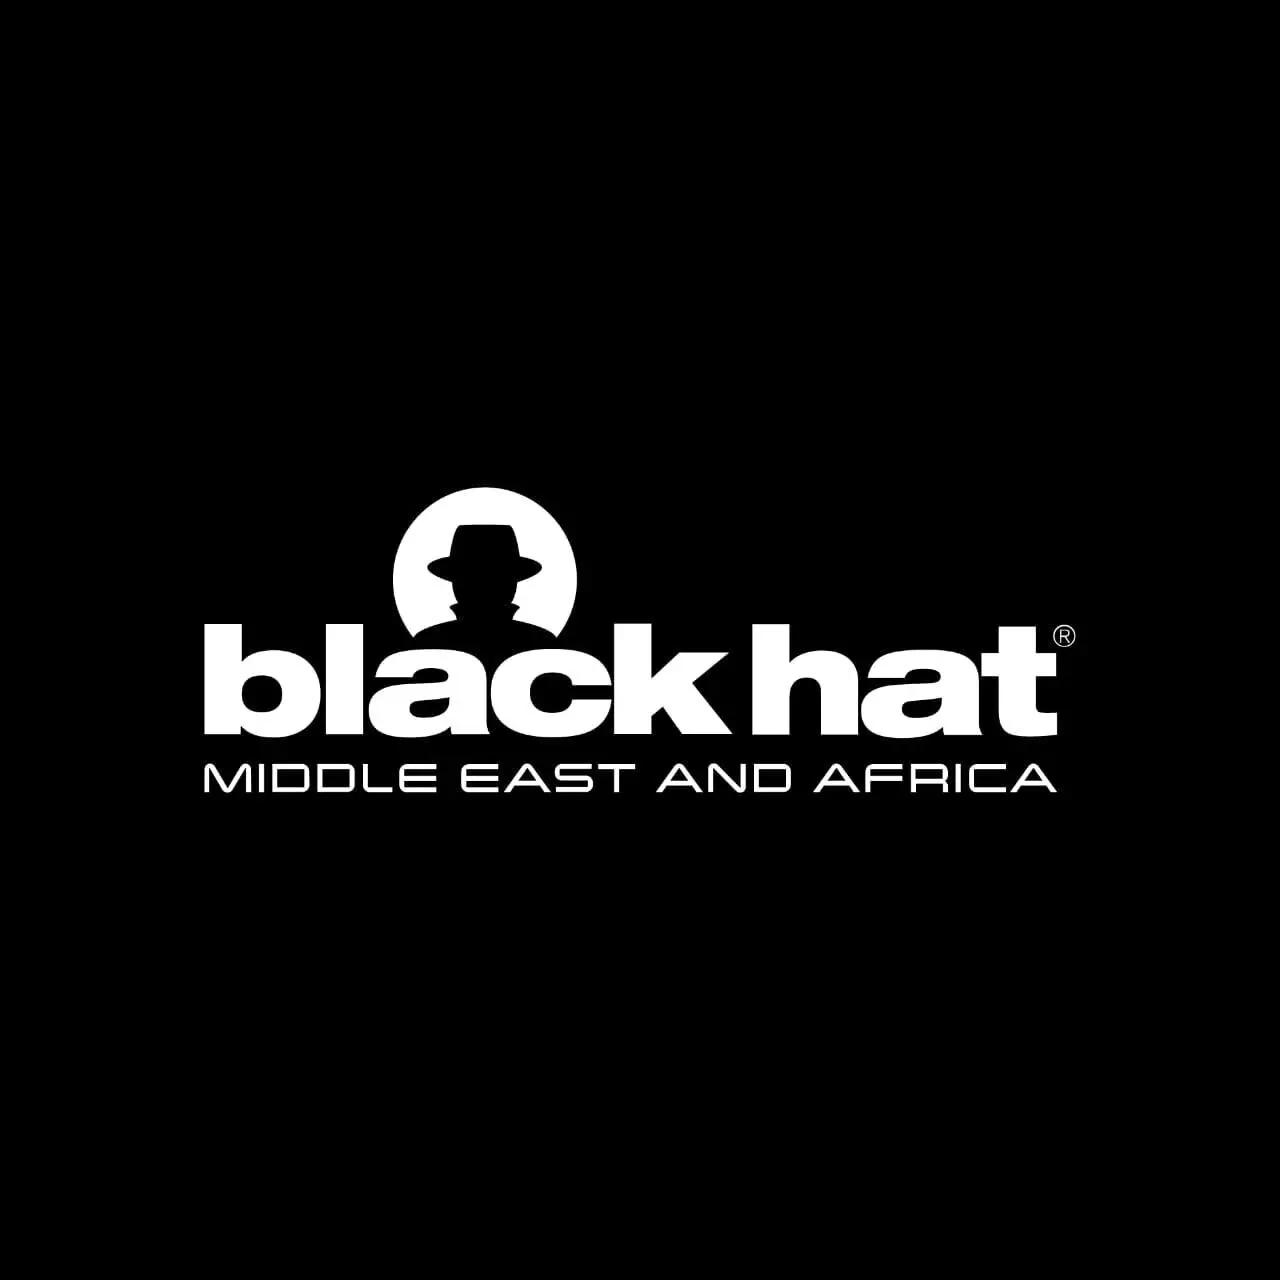 Top global cybersecurity experts convene at Black Hat event in Riyadh